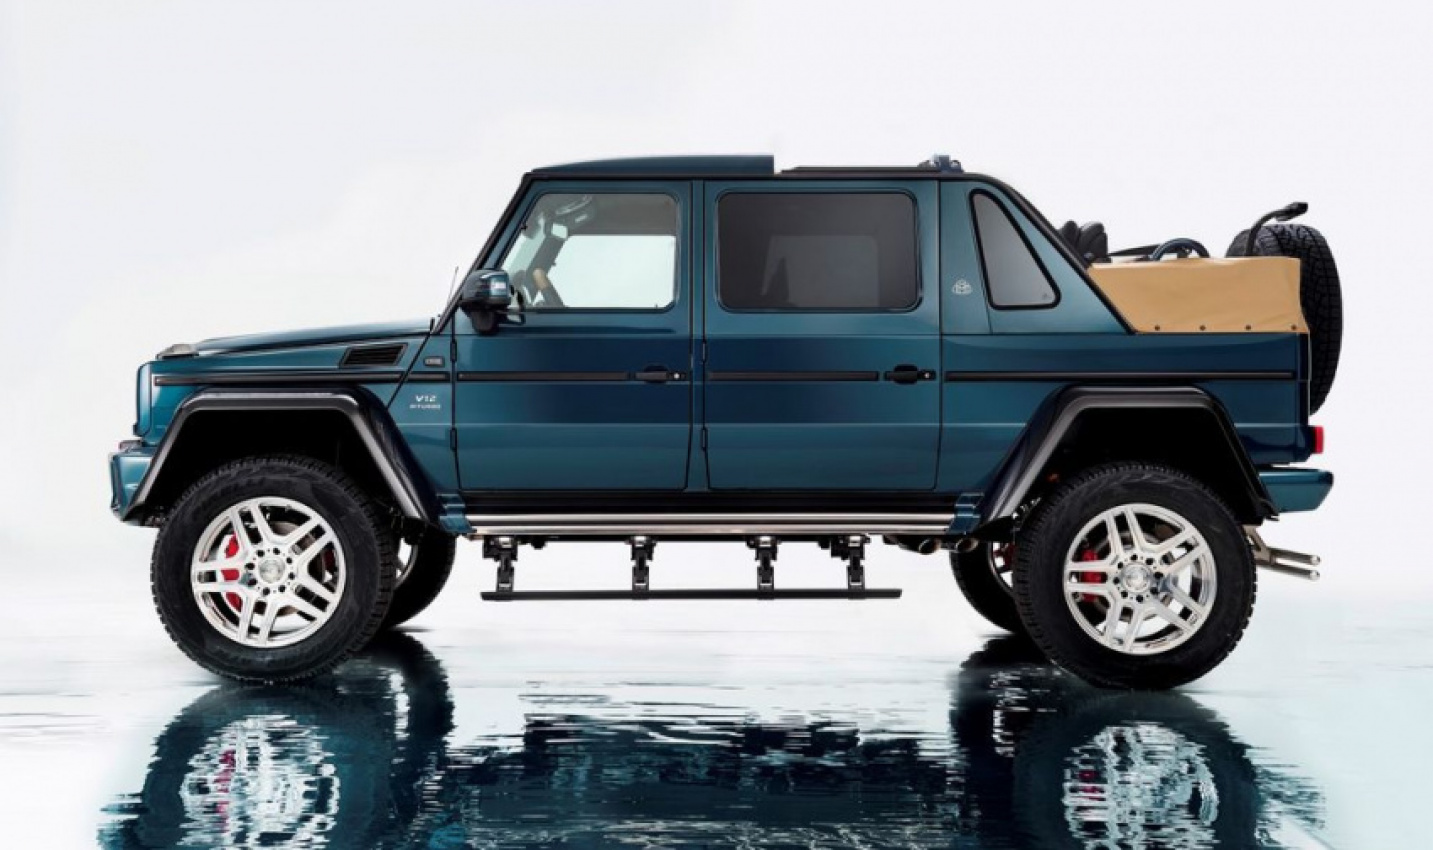 autos, cars, maybach, mercedes-benz, auto news, mercedes, mercedes-maybach, mercedes-maybach g650 landaulet, rappers may have just found their new dream ride - the 2017 mercedes-maybach g650 landaulet